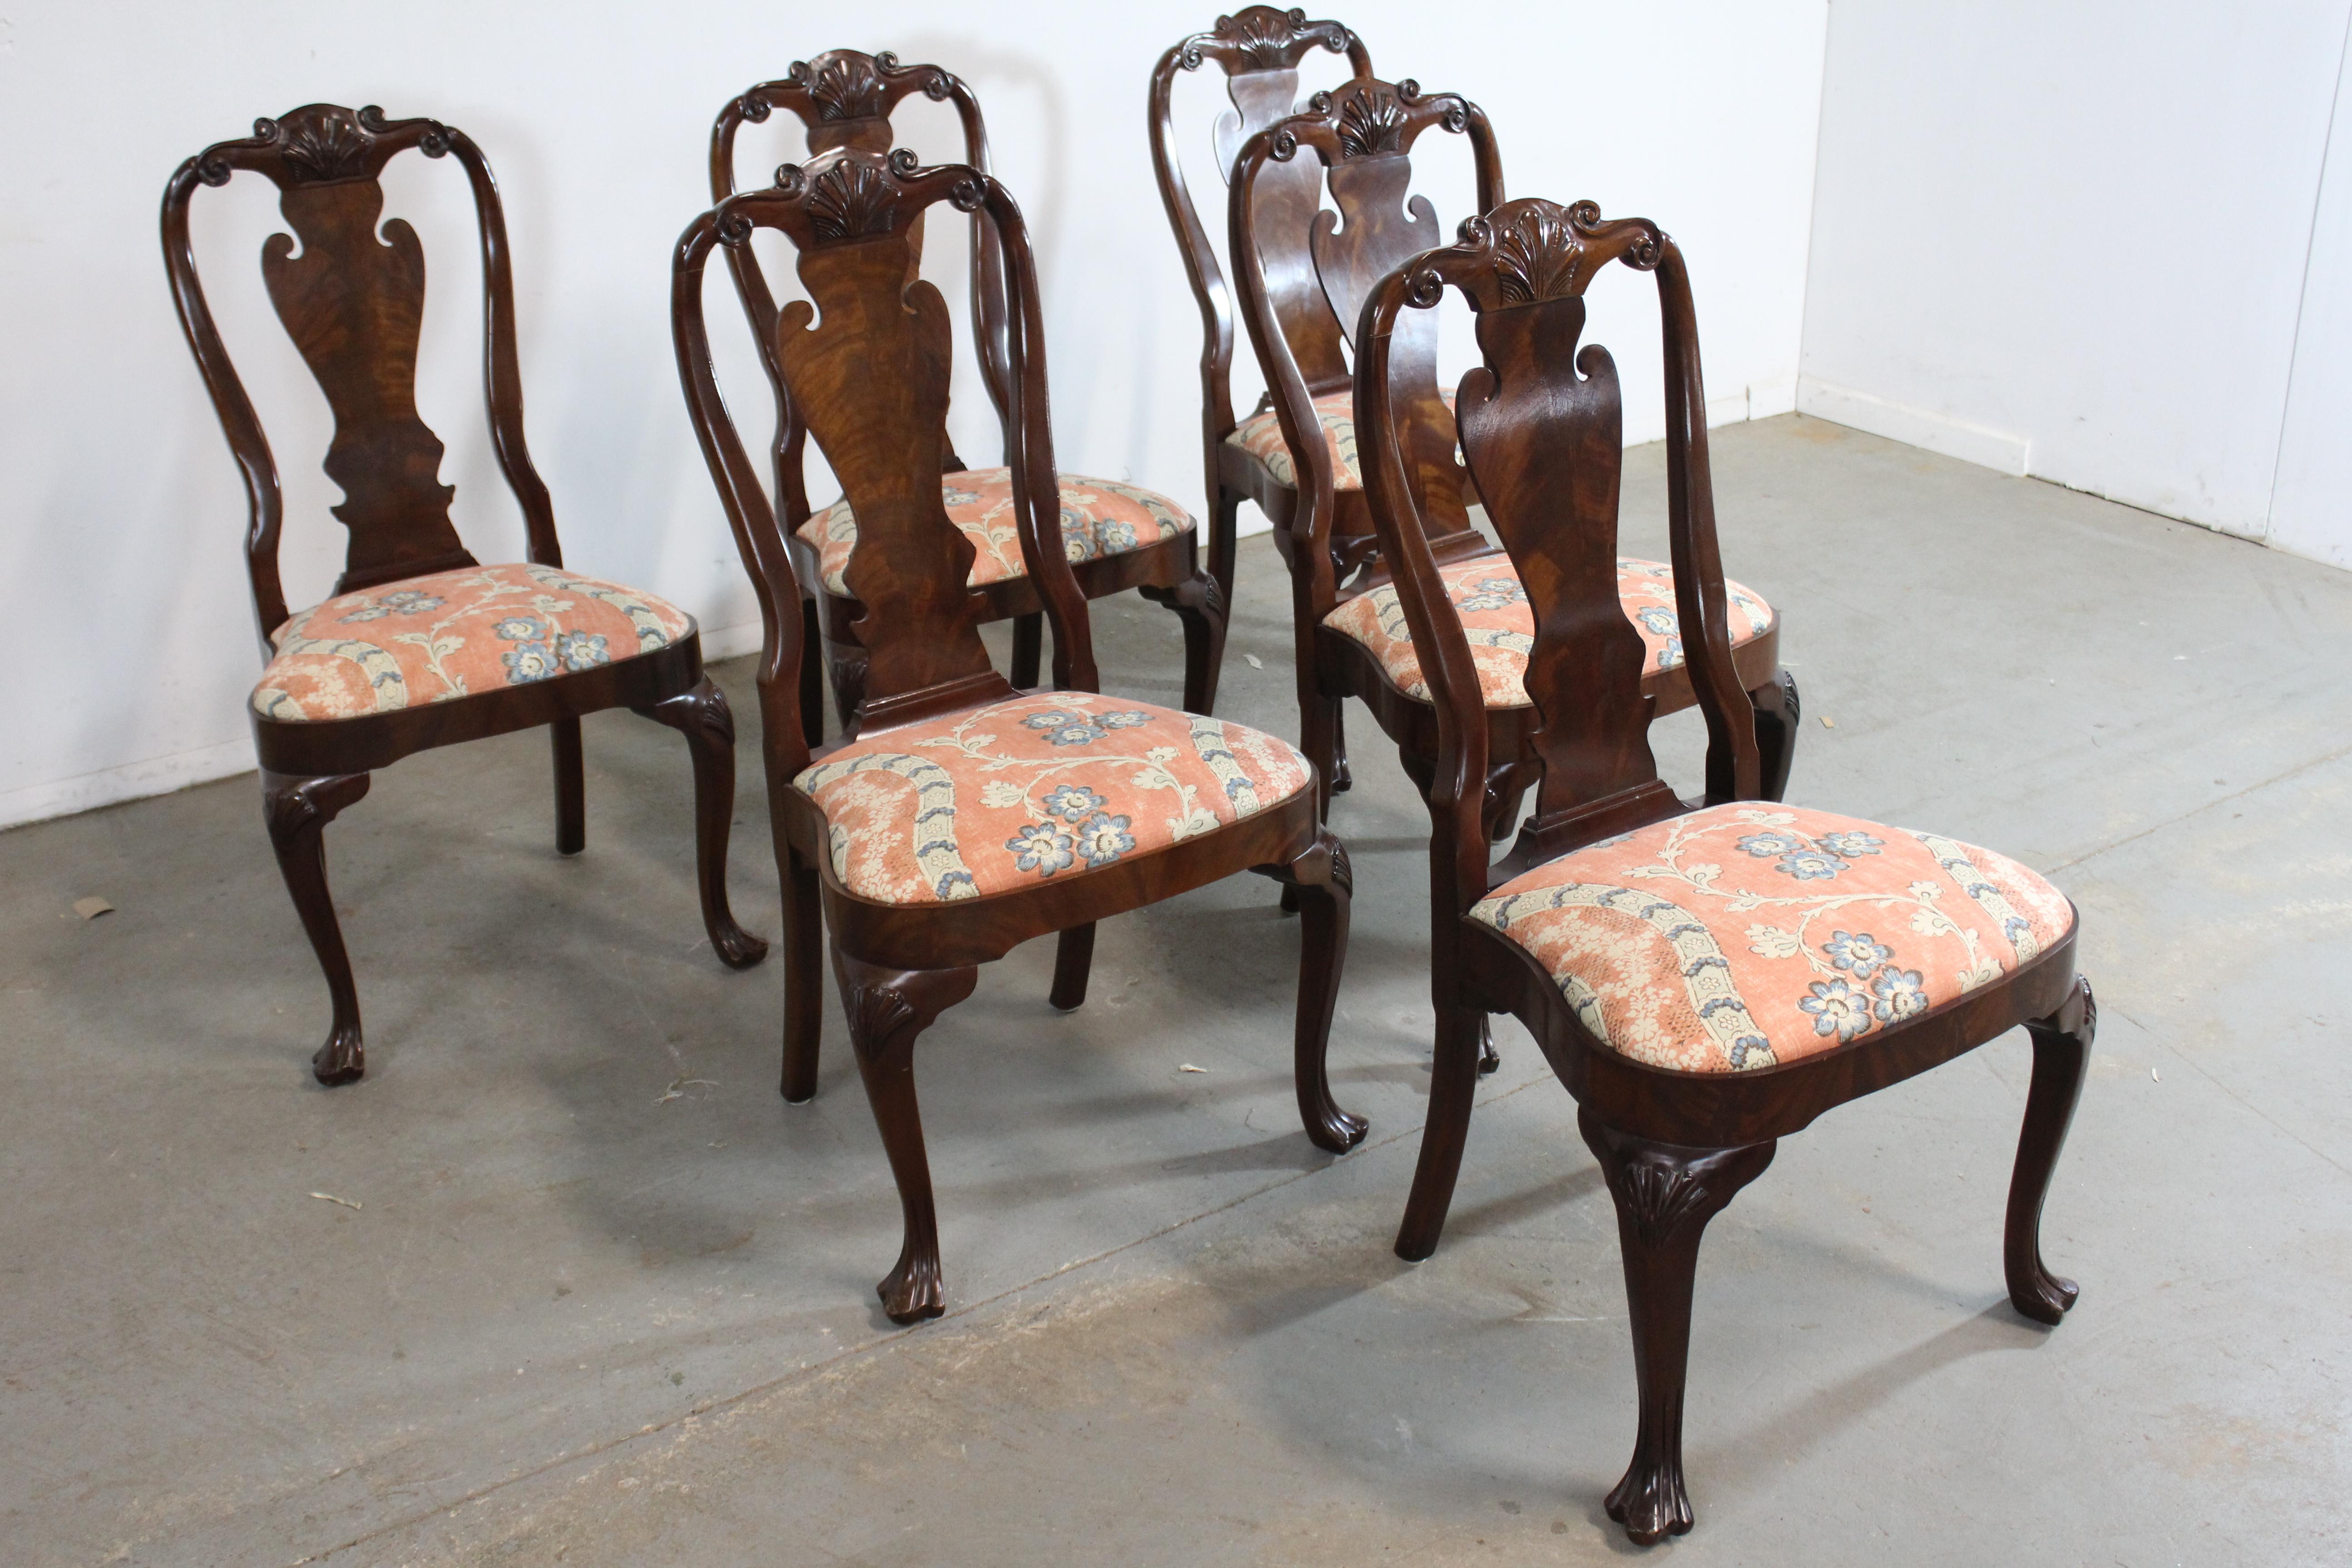 Set of 6 Queen Anne Solid Mahogany Dining Side Chairs

Offered is a Set of 6 Georgian/ Queen Anne Solid Mahogany Dining Side Chairs. The chairs have a great look and are ready for everyday use. They are made of solid mahogany wood and have